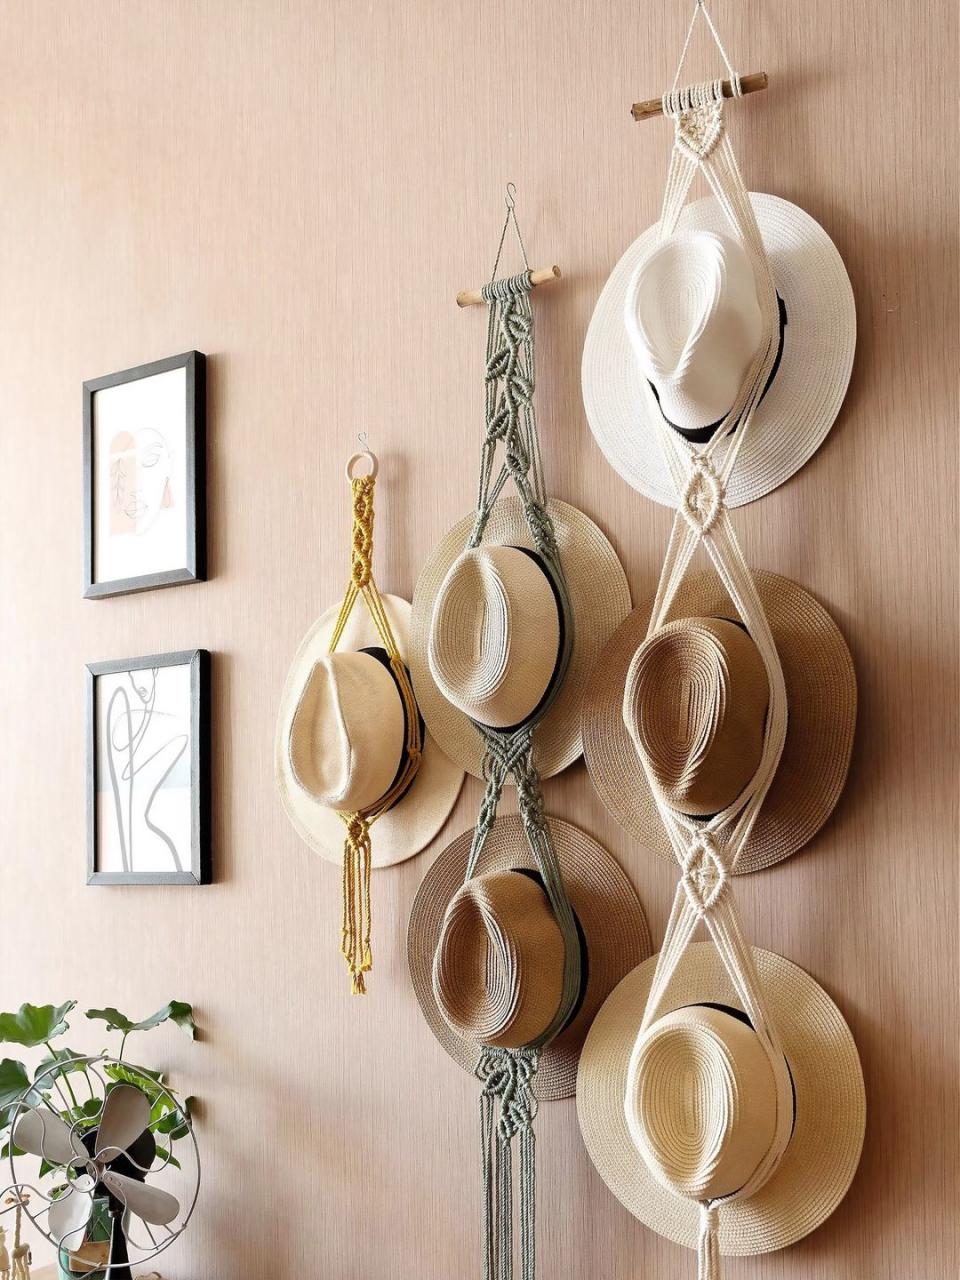 hats and macrame holders hanging from wall